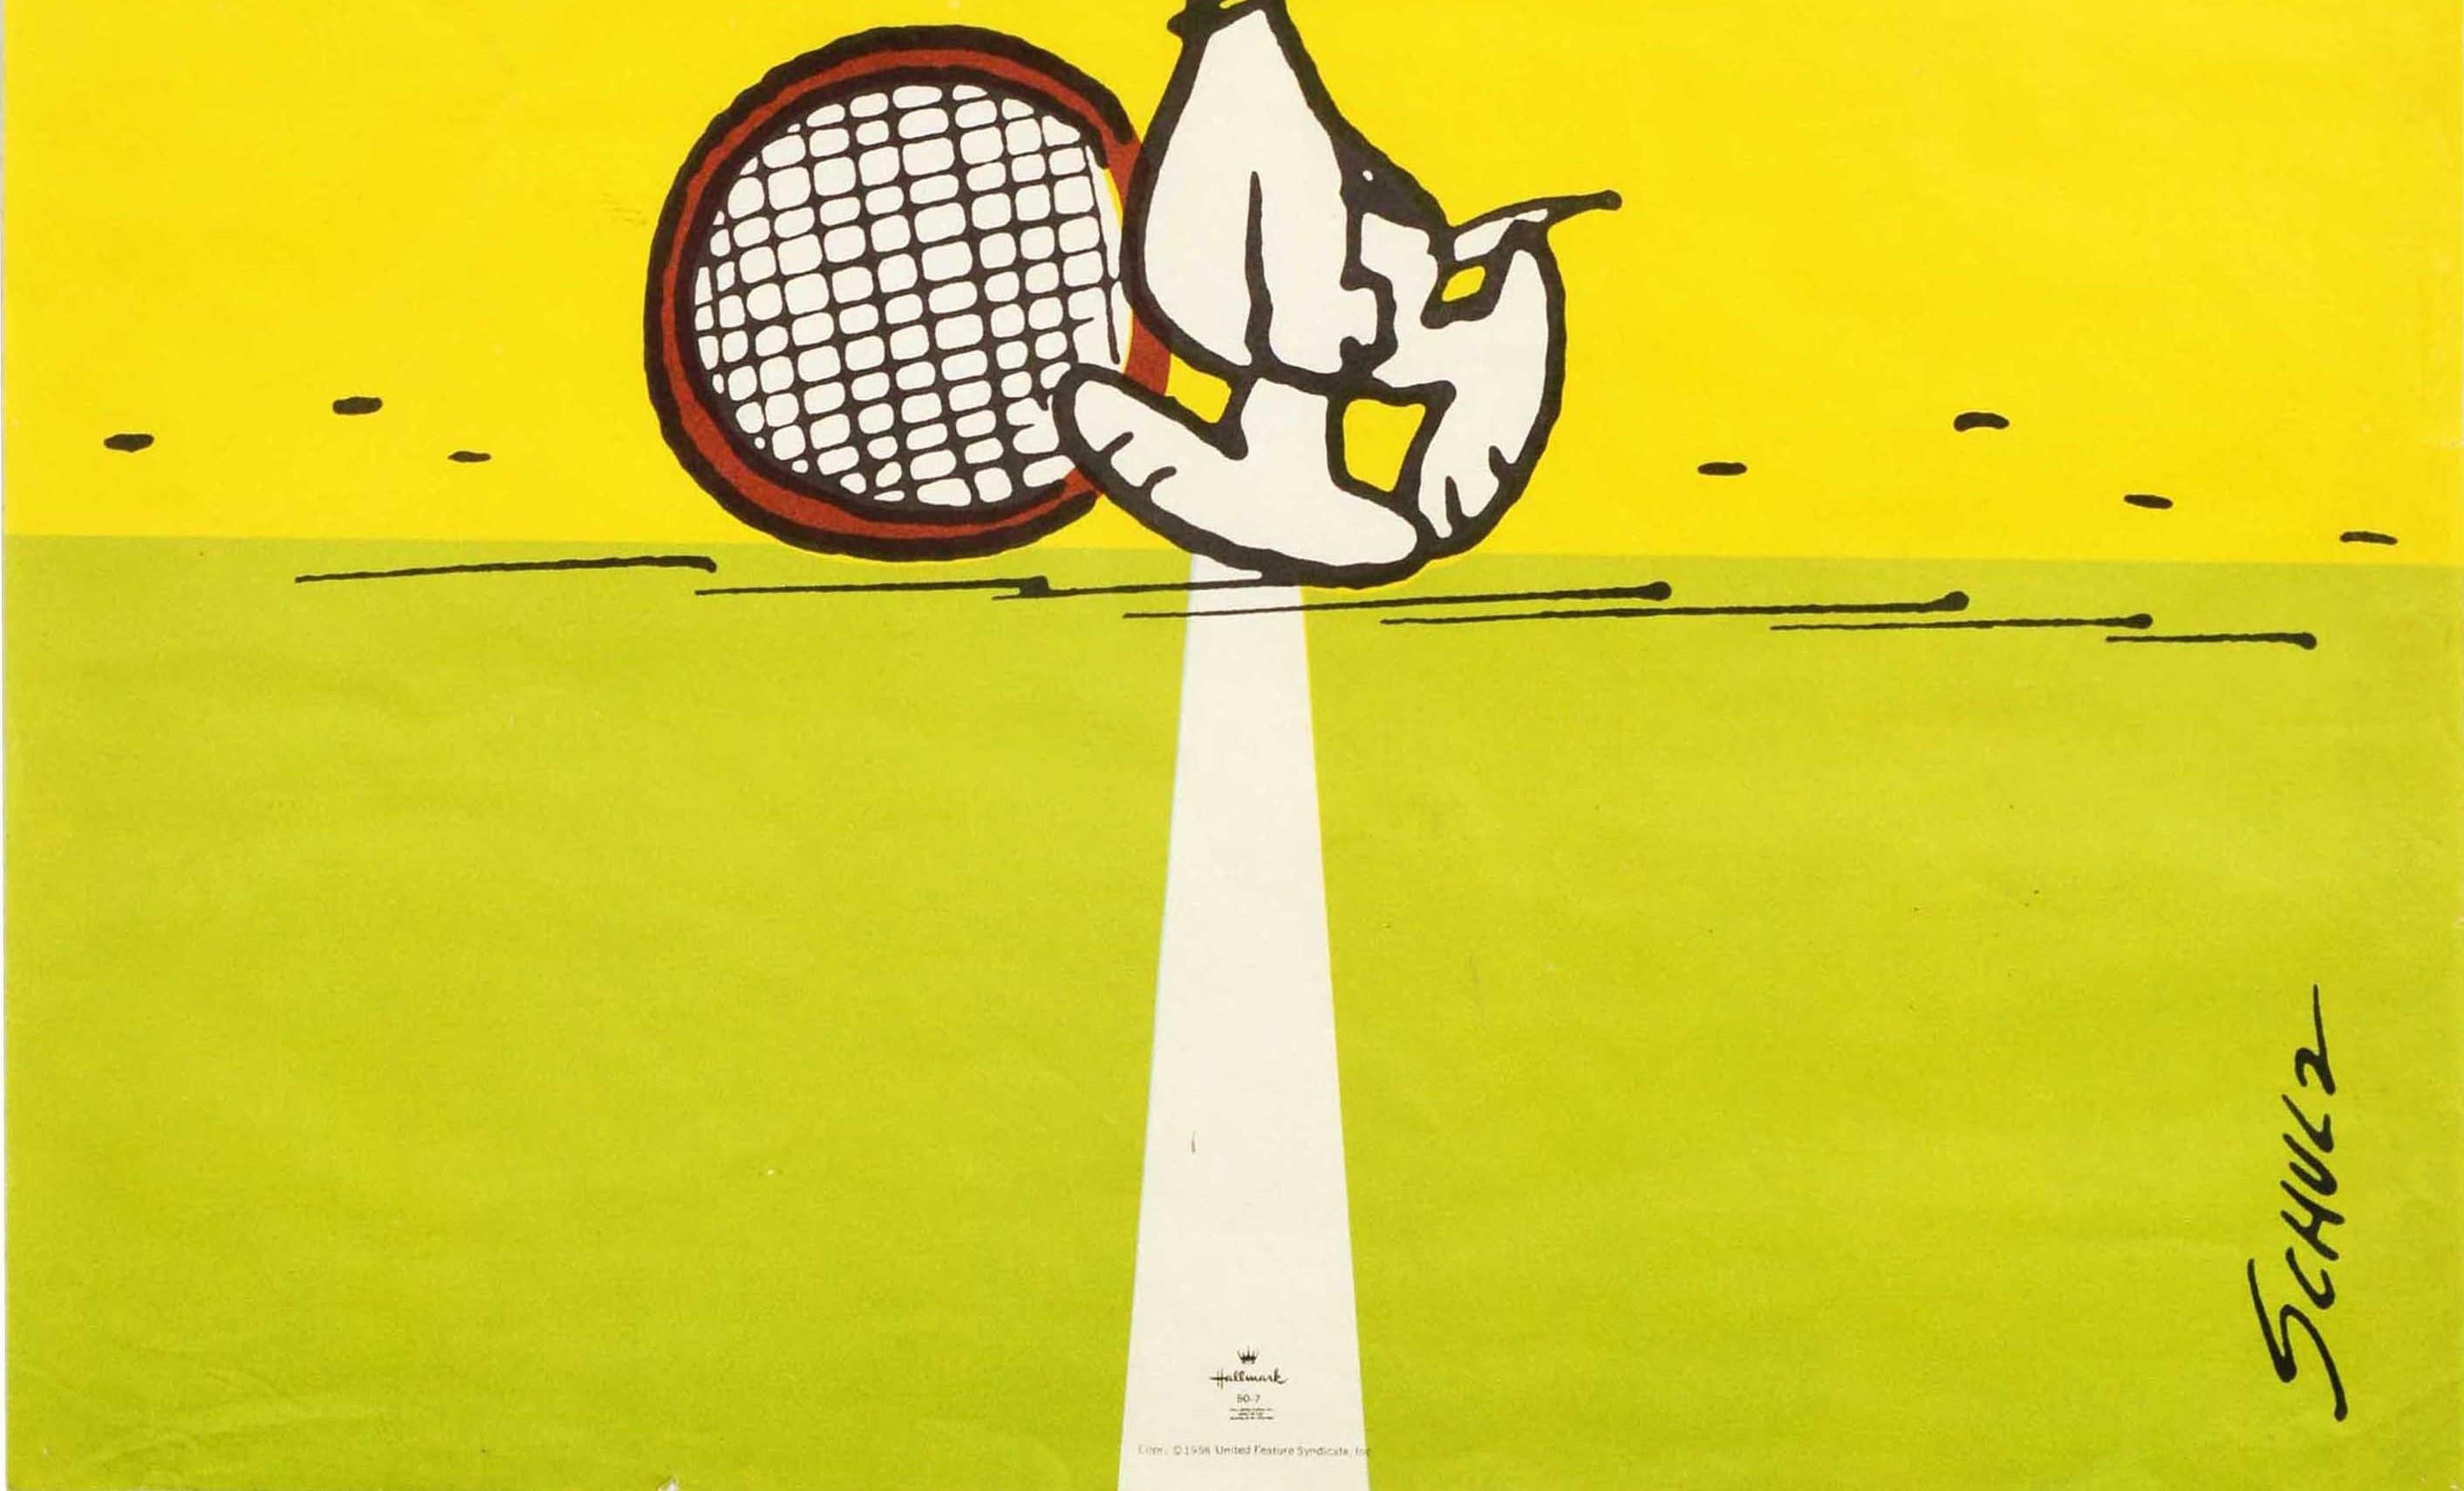 Original Vintage Snoopy Tennis Poster - It Doesn't Matter If You Win Or Lose... - Print by Charles M. Schulz